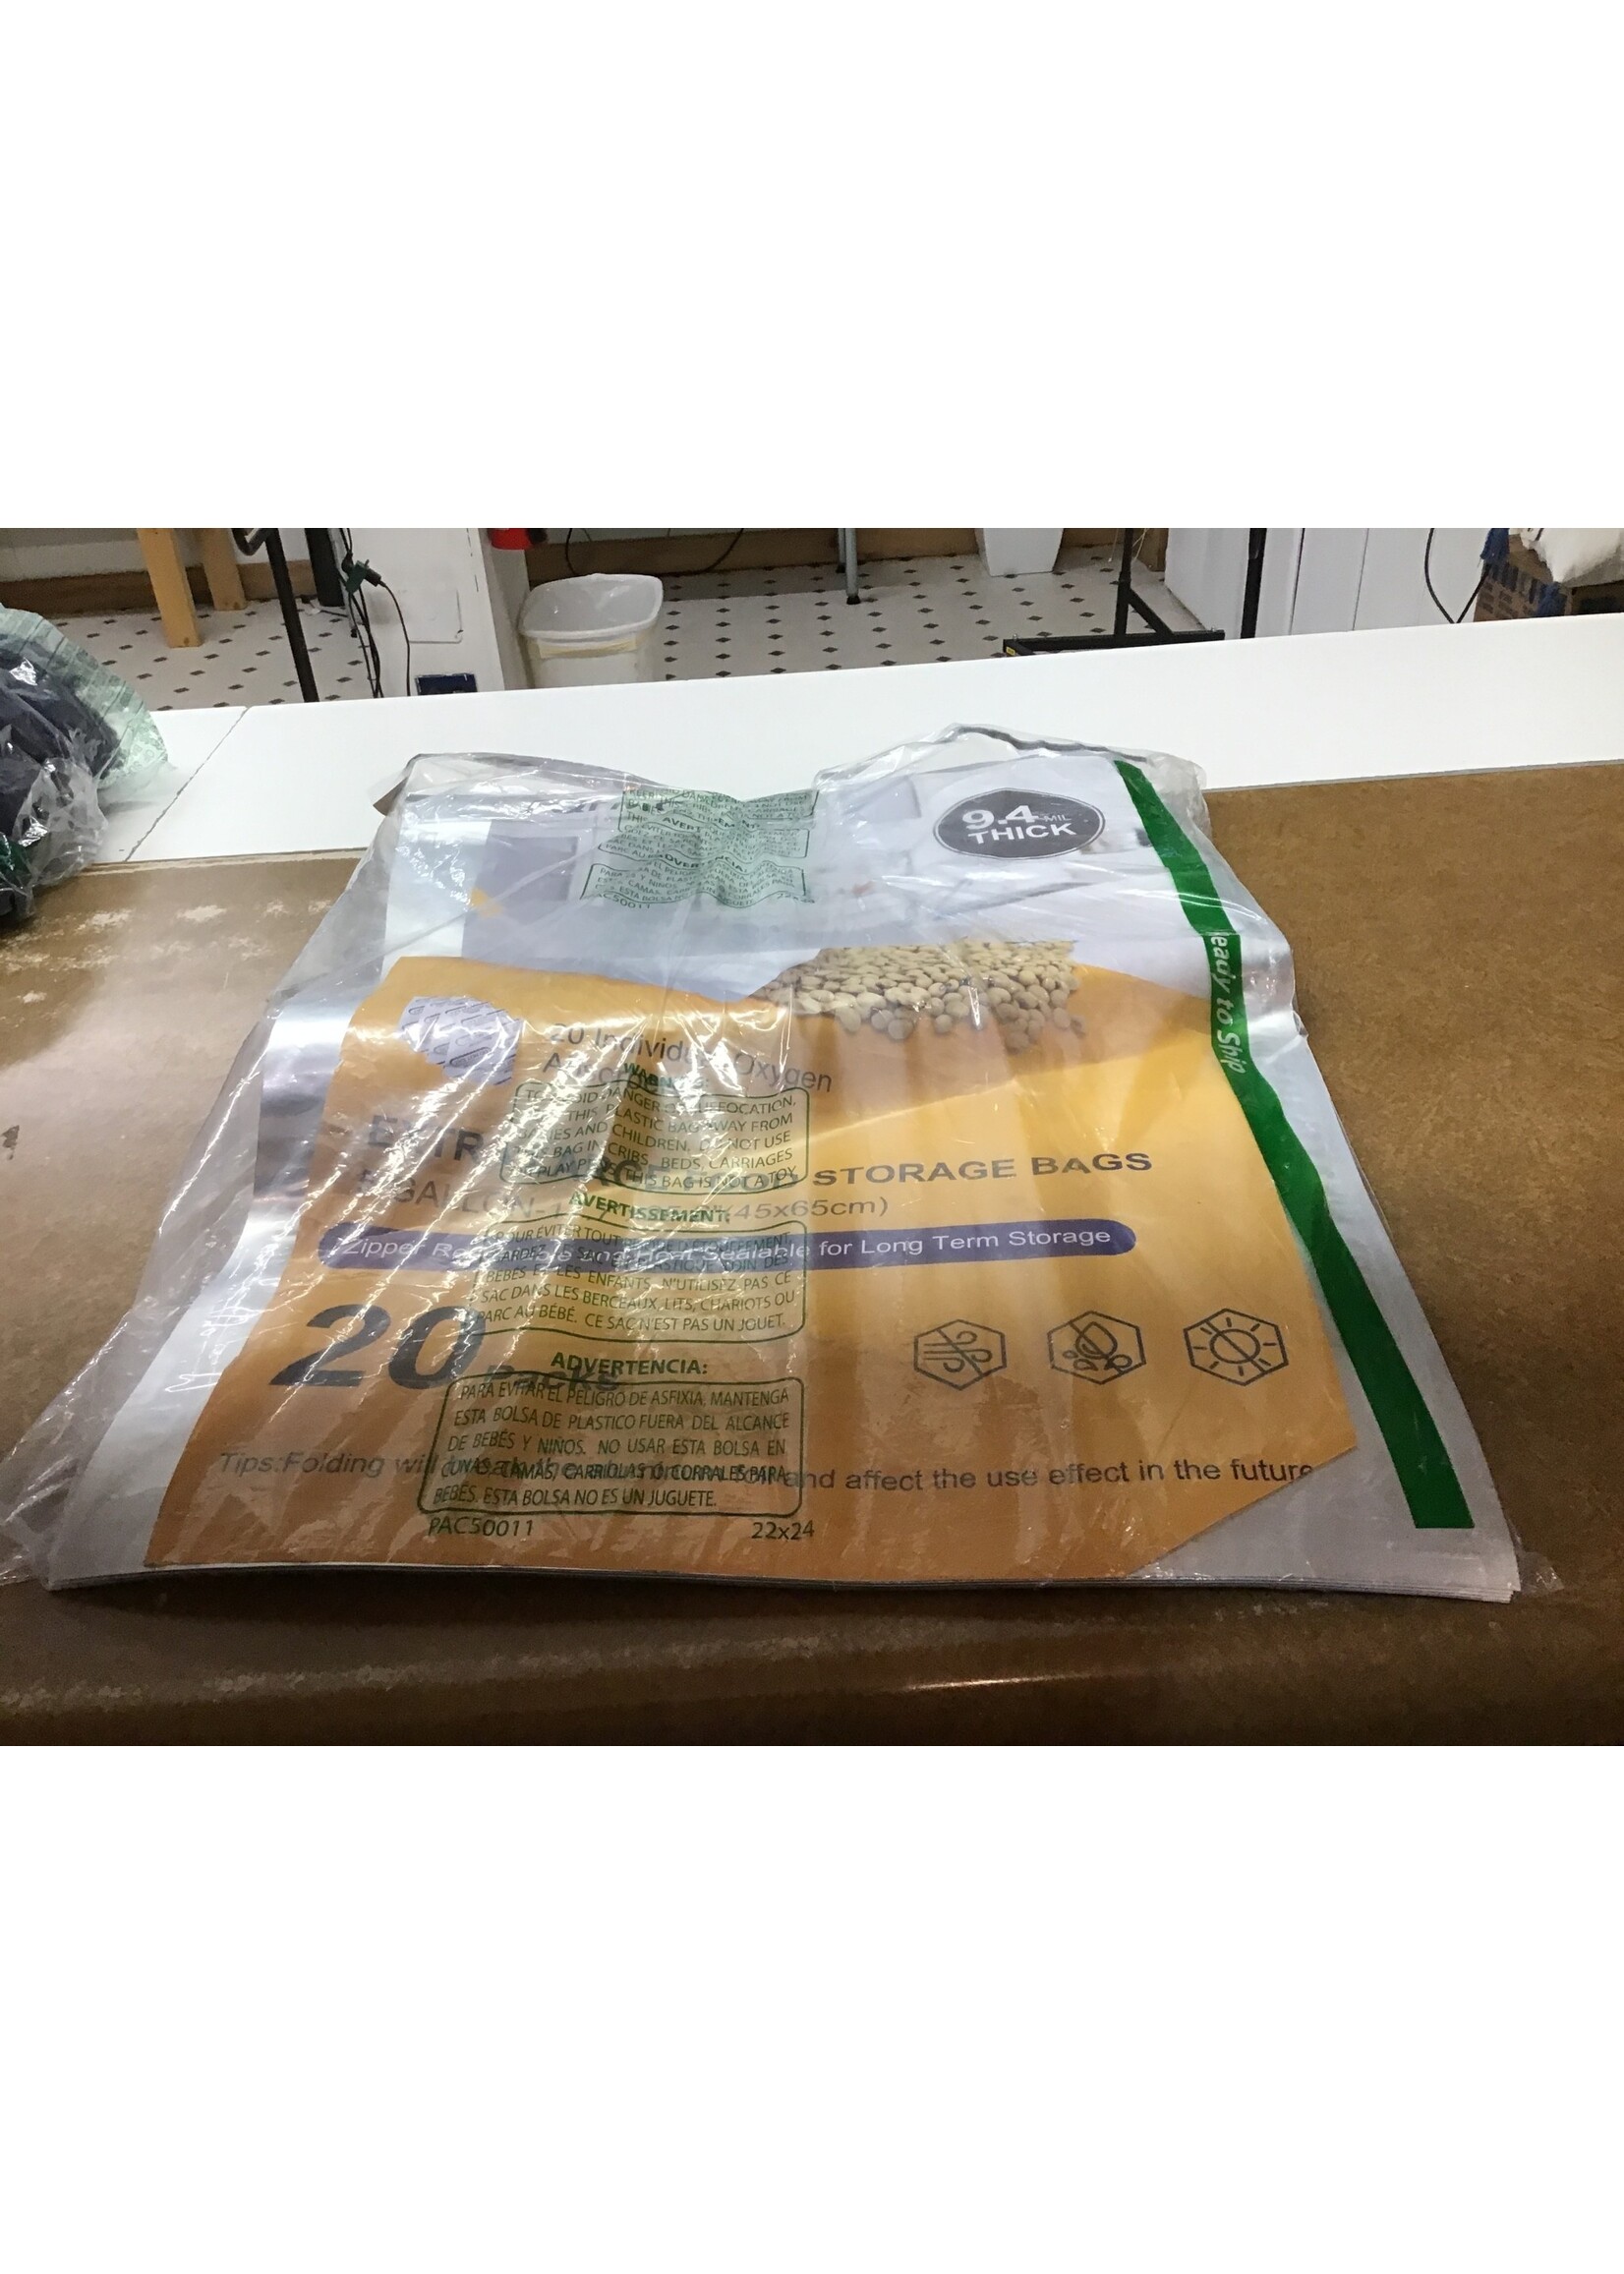 *open pkg./no absorbers* 19 Extra large food storage bags 5 gallon 9.4 mil thick